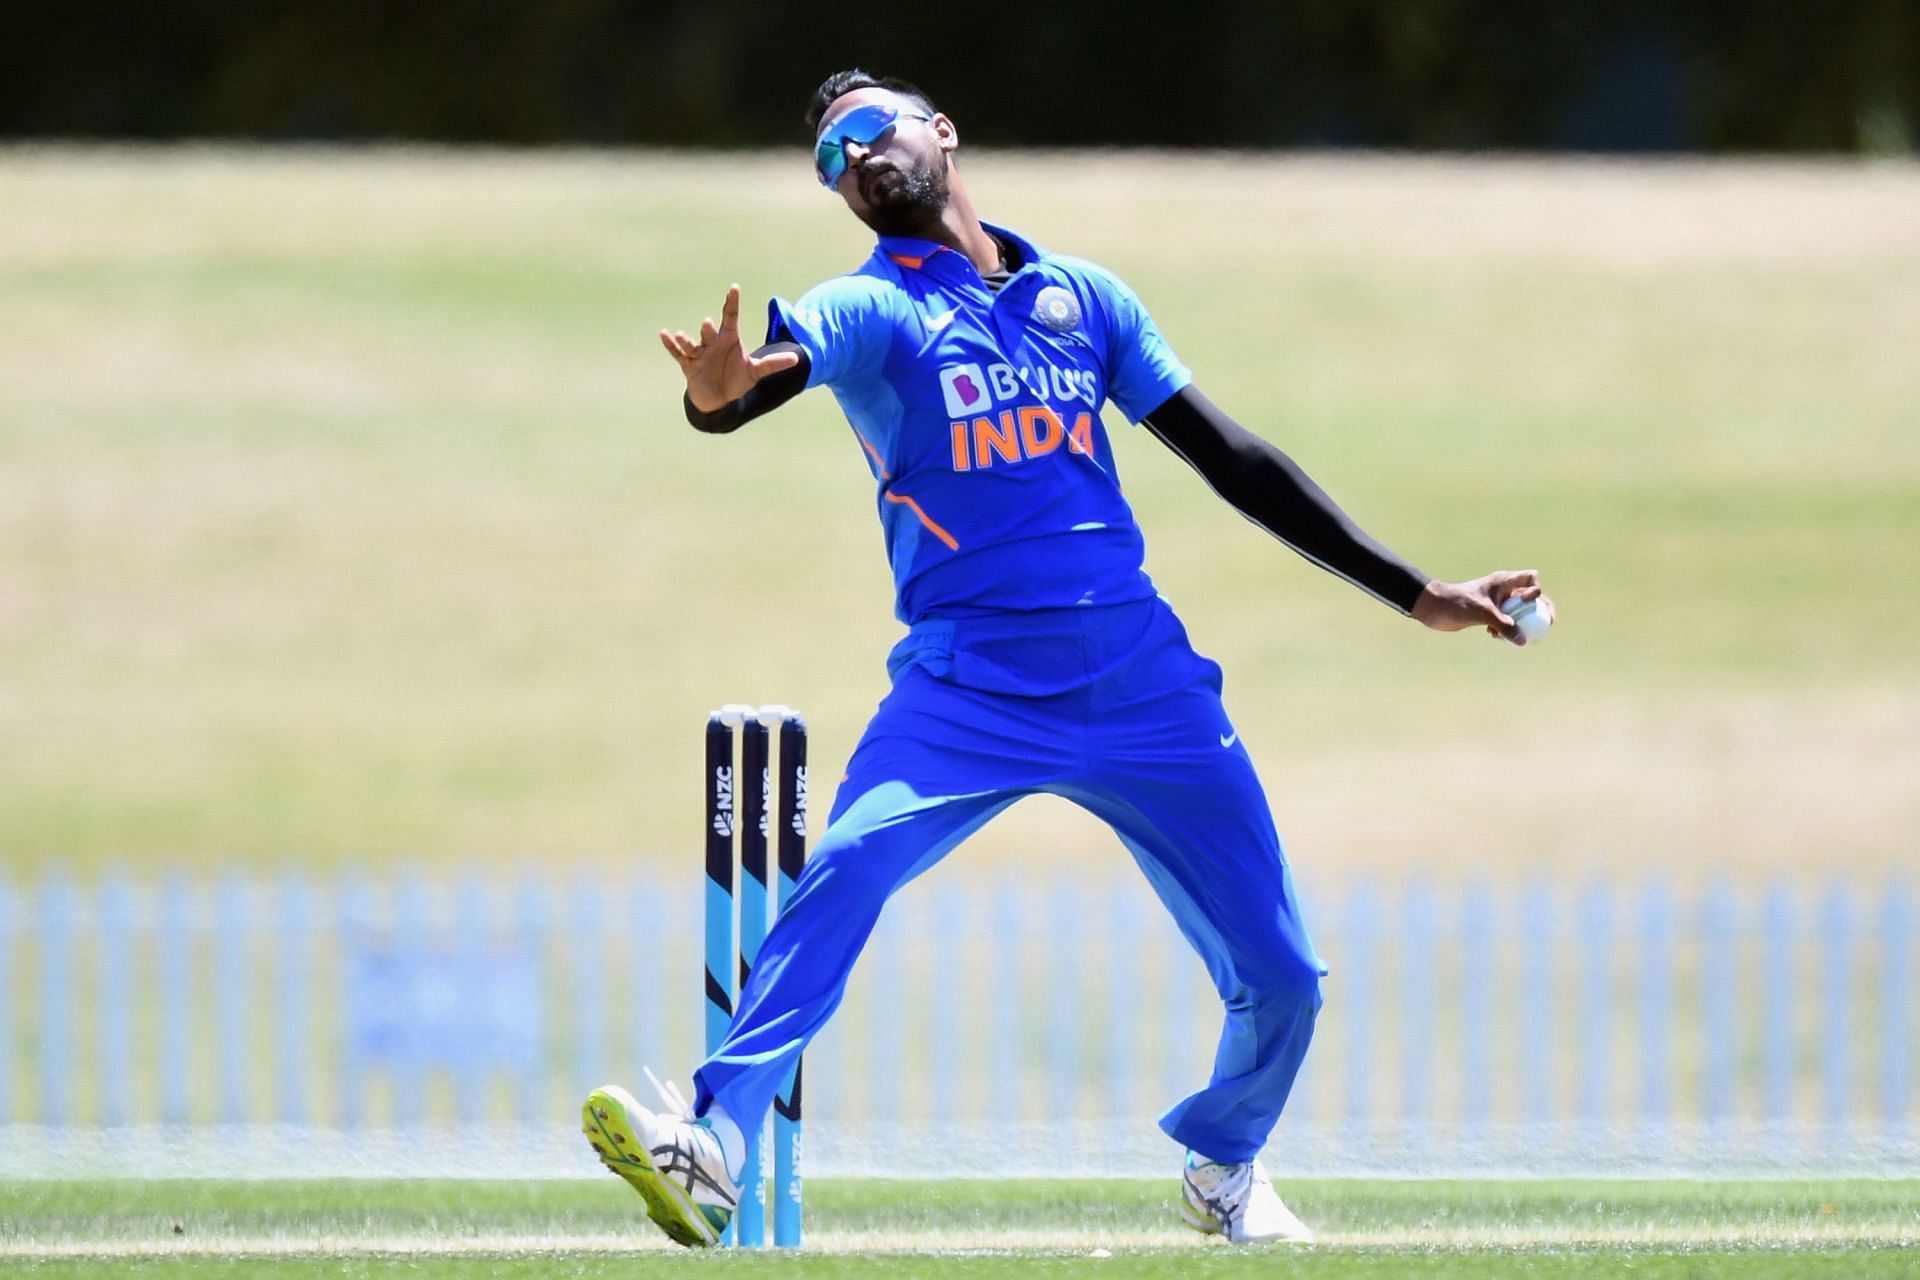 Krunal Pandya has joined Warwickshire county for Royal London Cup 2022 (Image Courtesy: Getty Images)